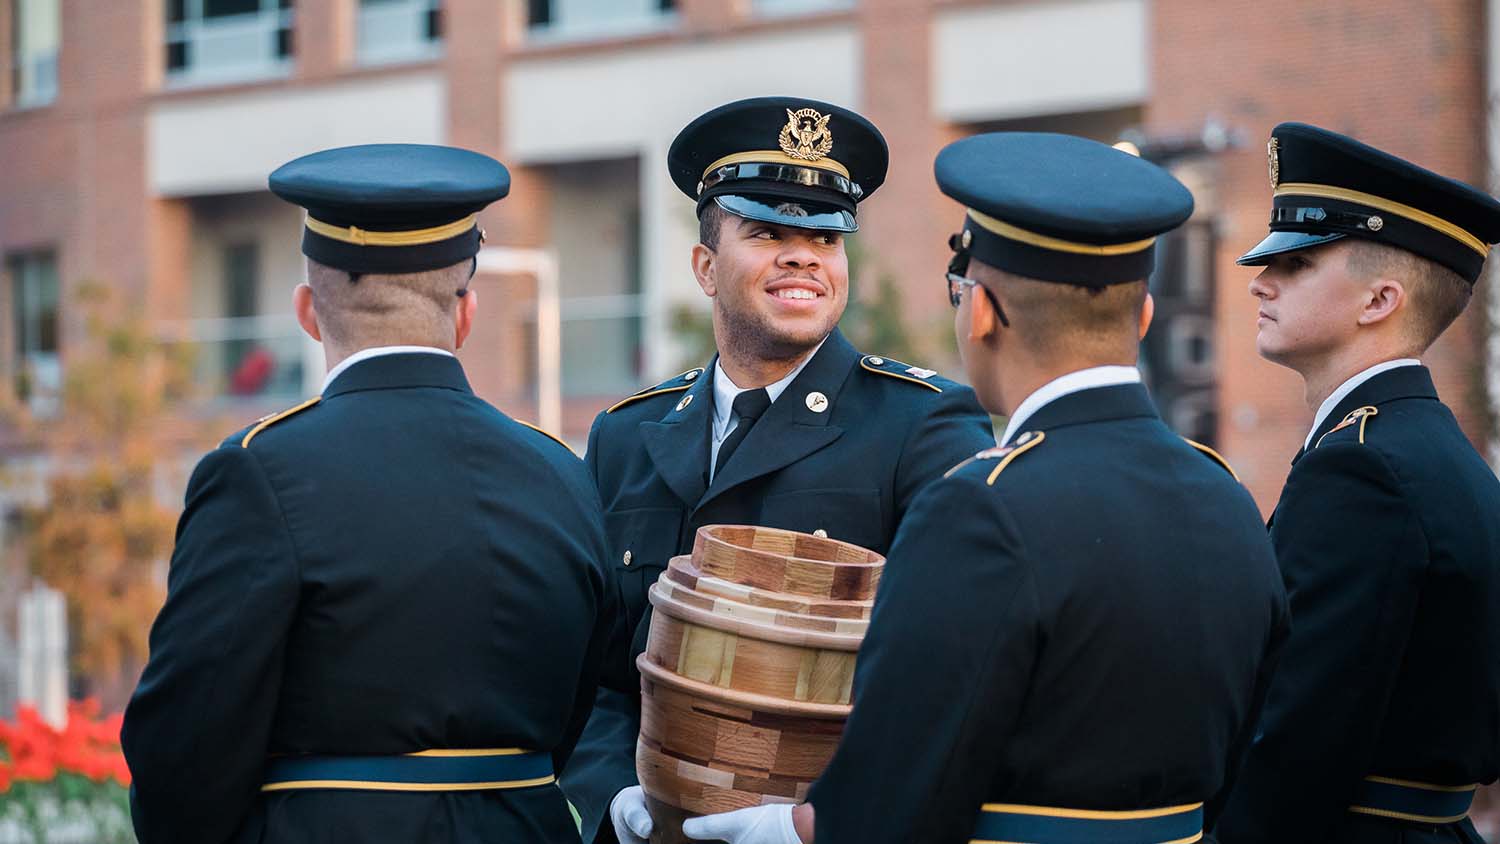 Four ROTC cadets together in uniform.